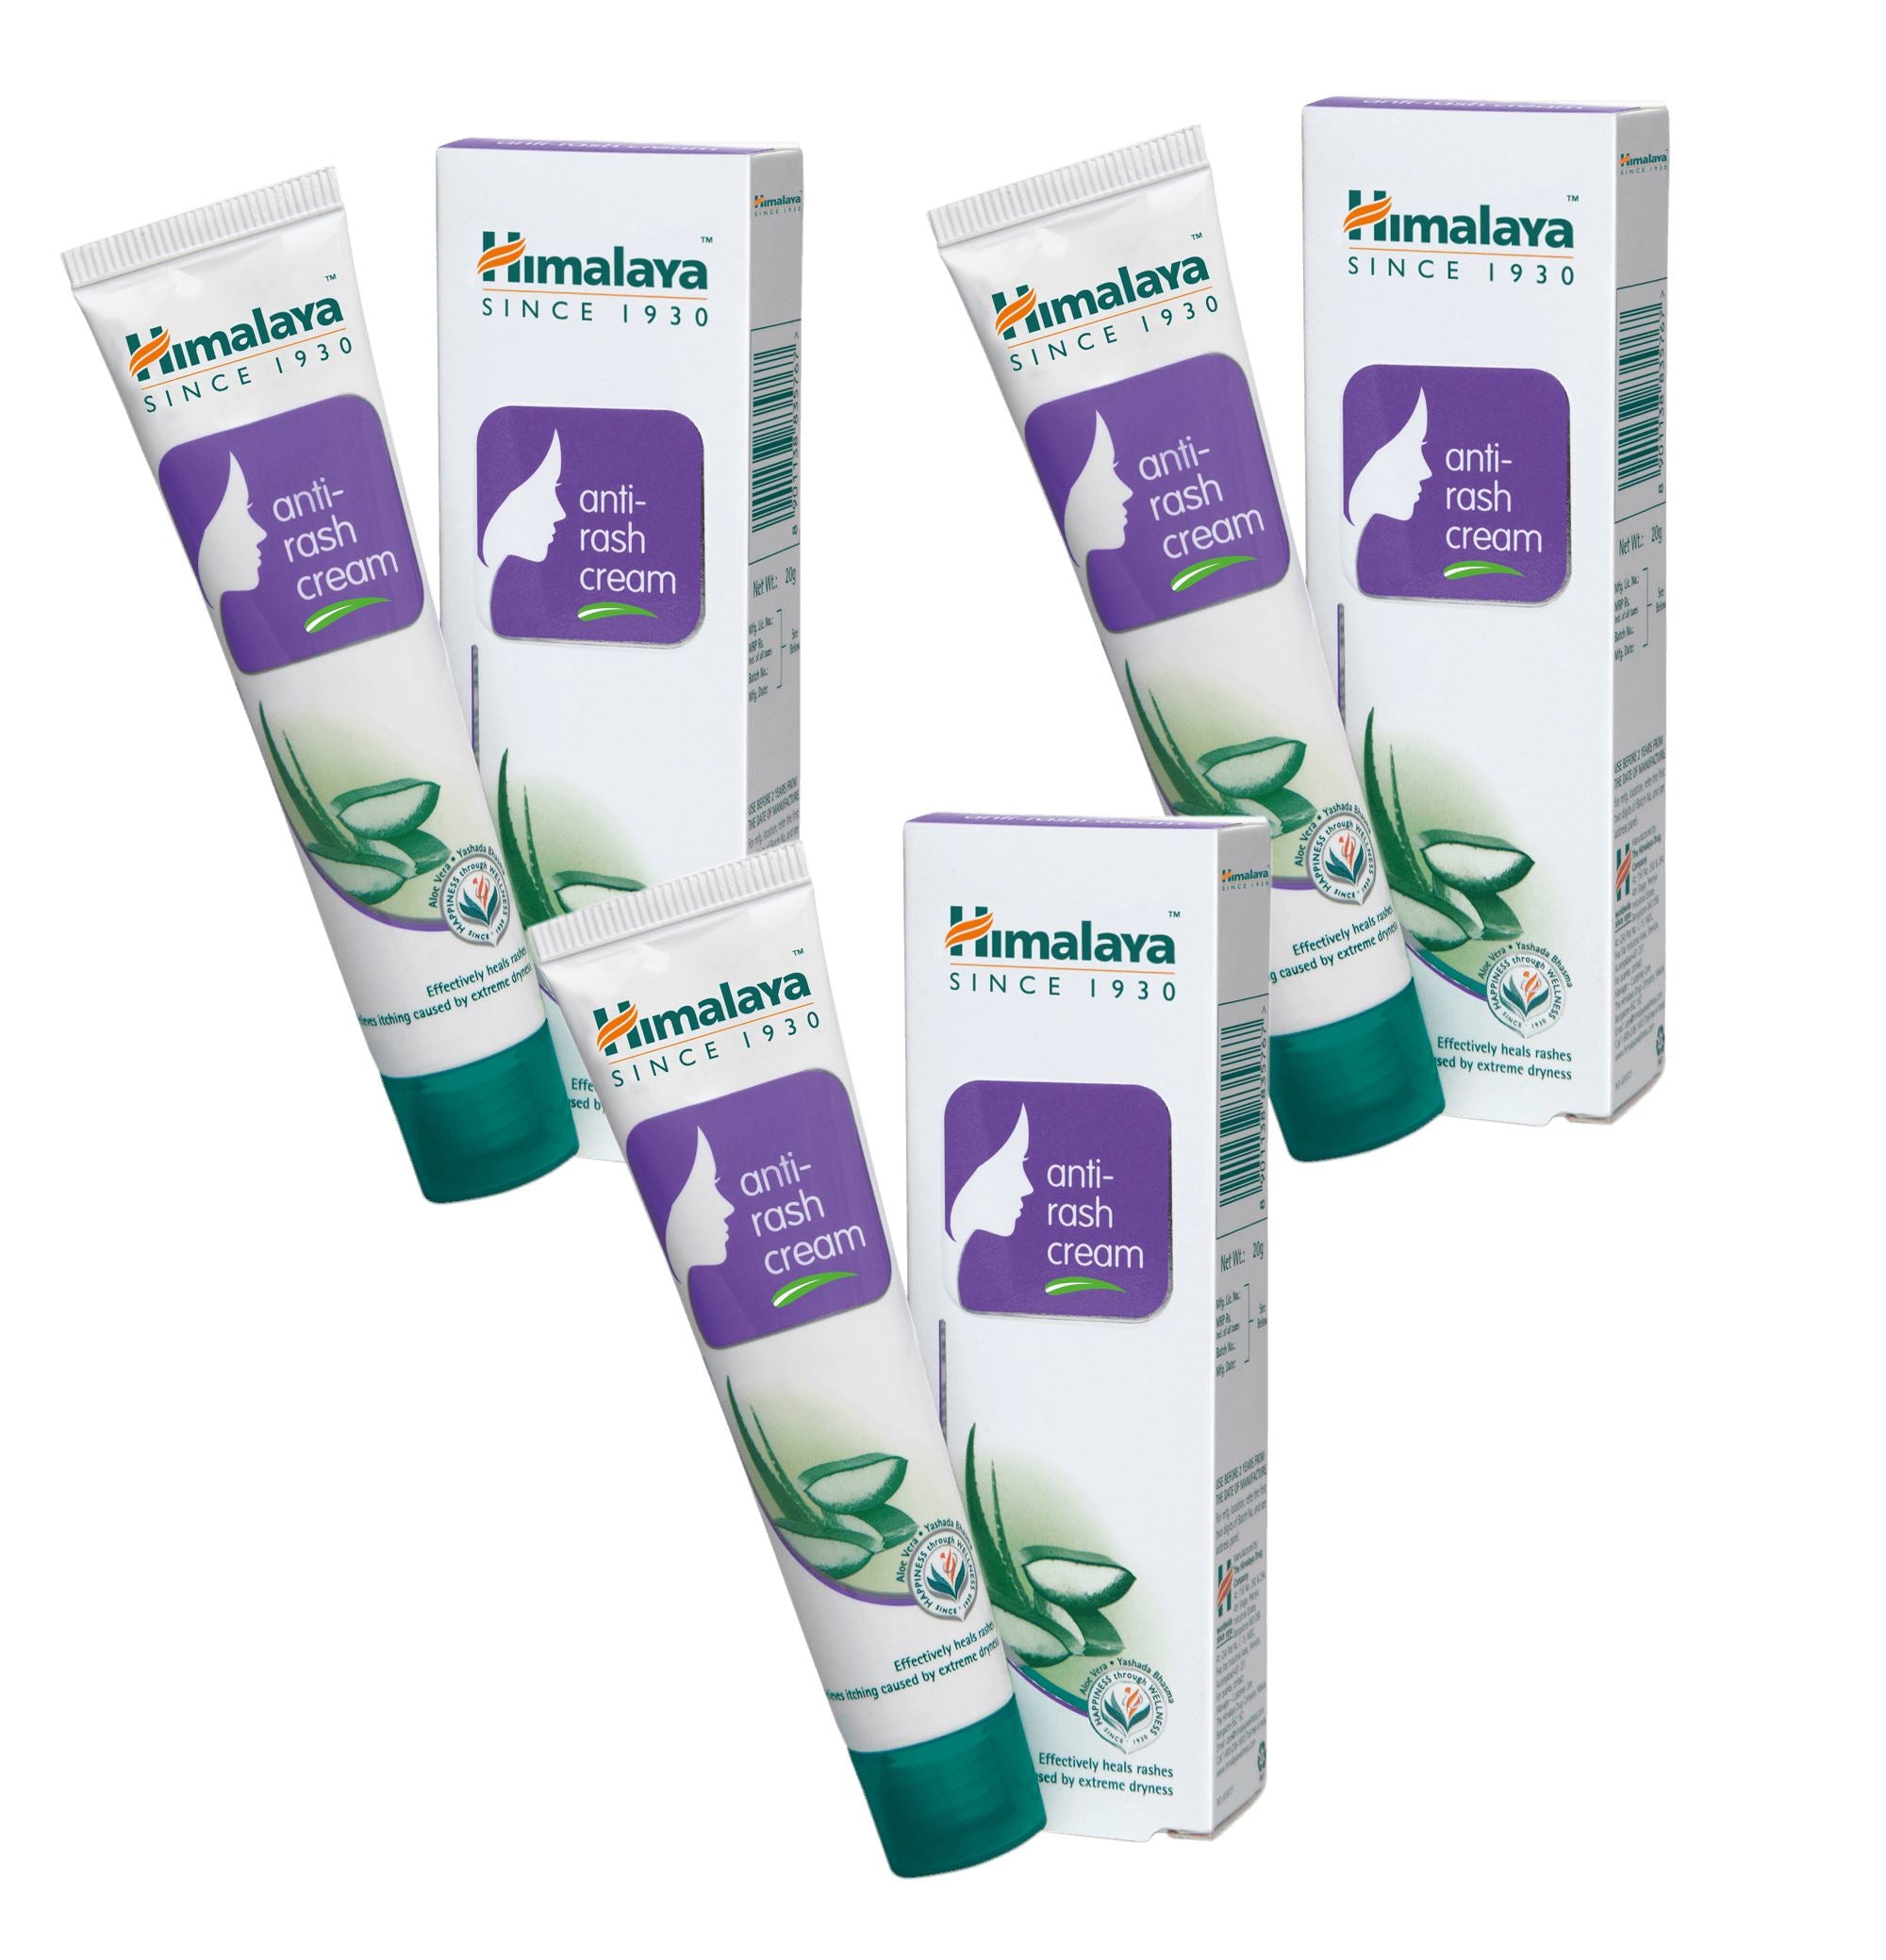 Himalaya Anti-rash cream - Effectively heals rashes and relieves itching